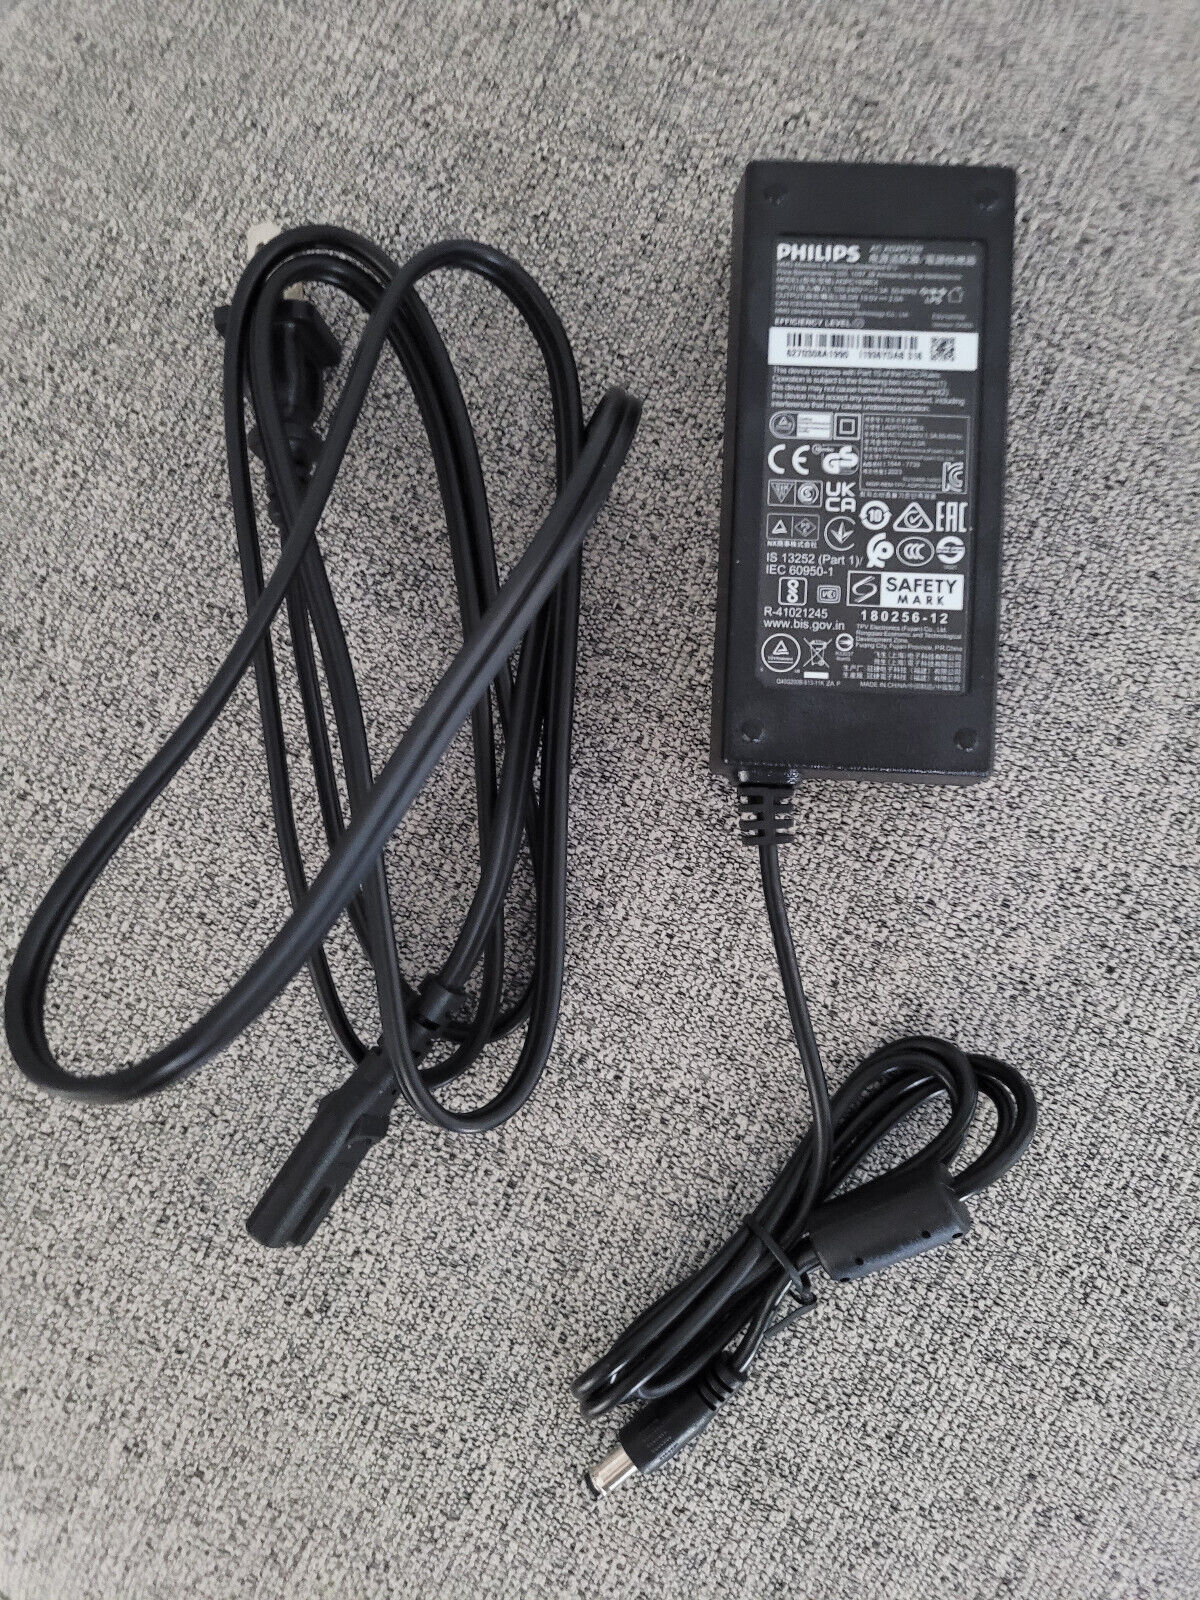 OEM Power Adapter for Philips 271E1S Monitor